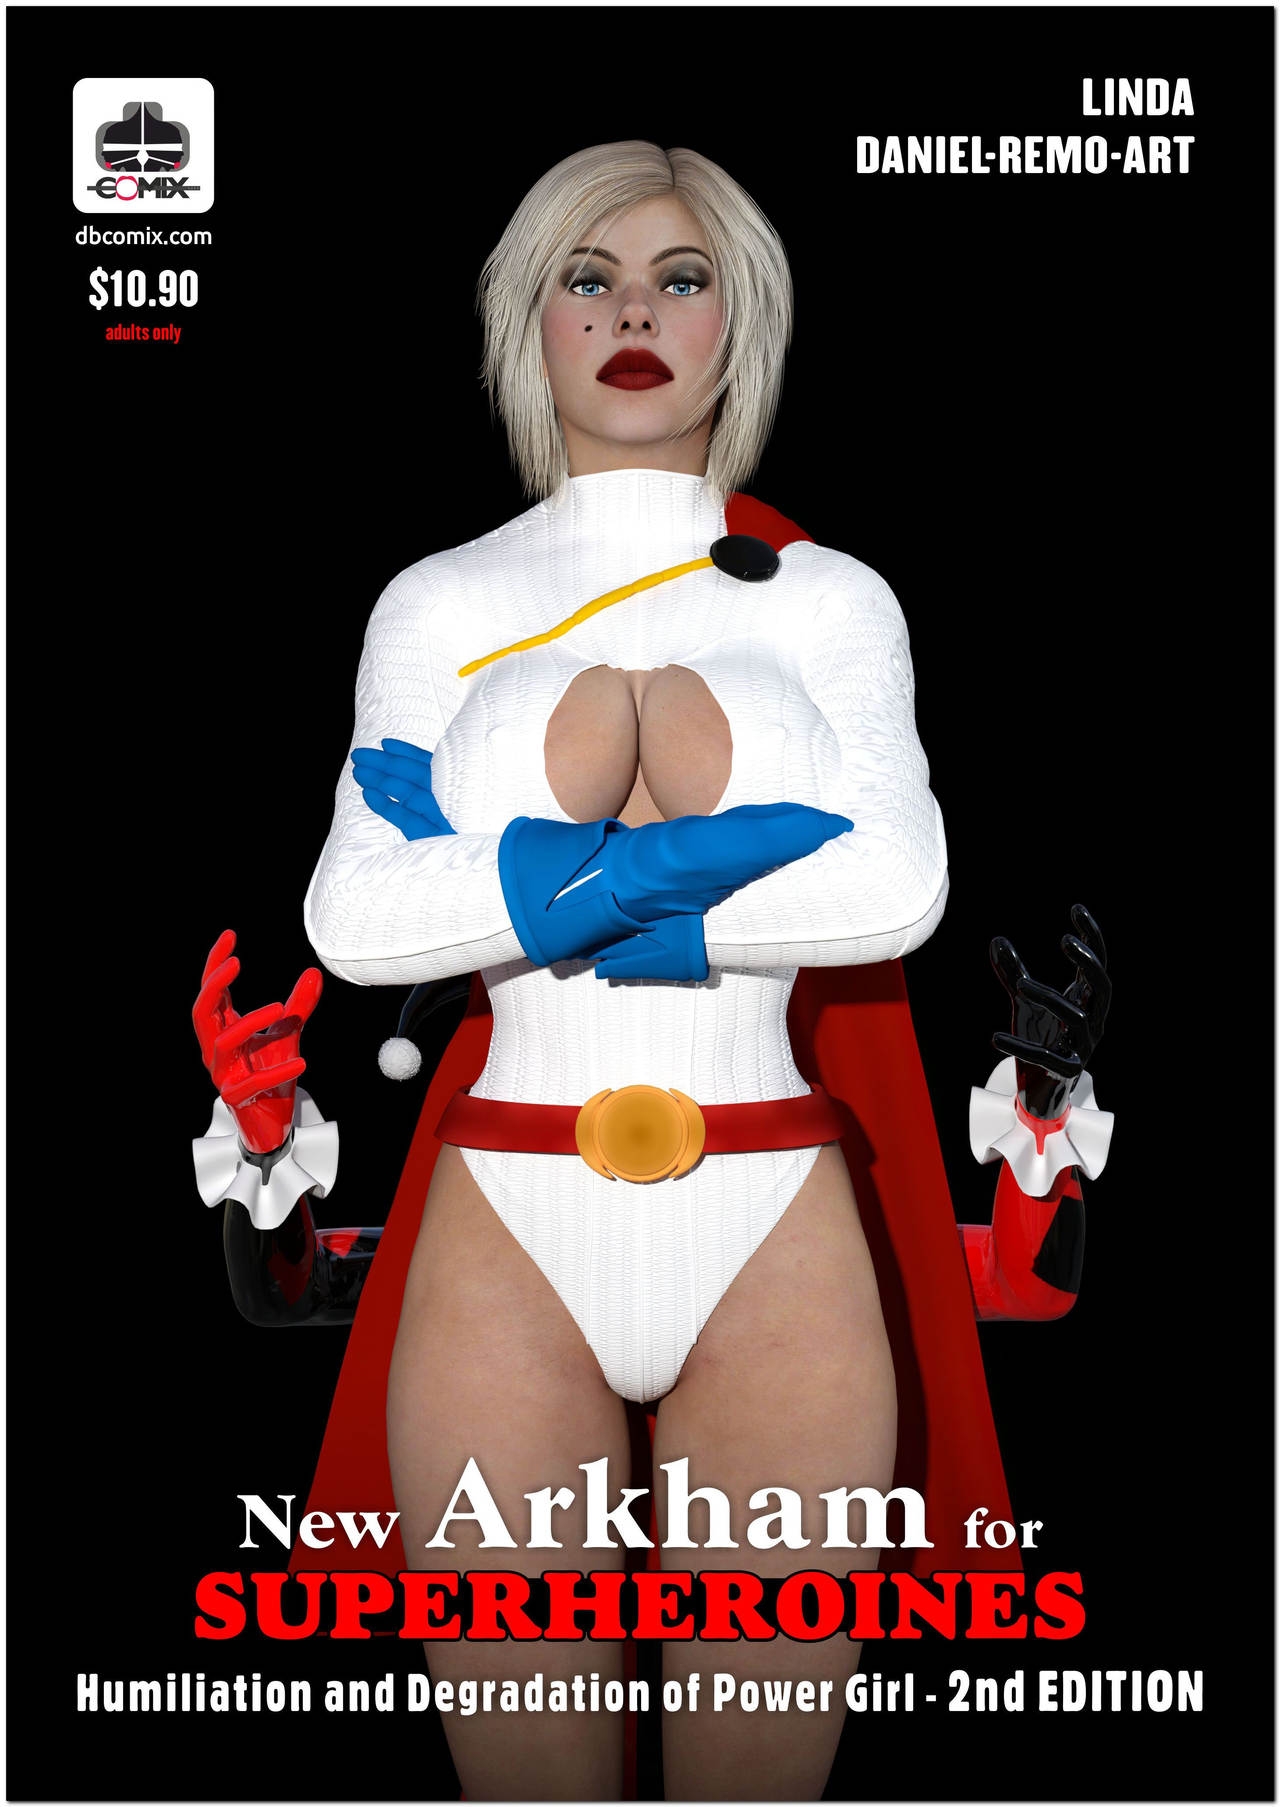 [DBComix] New Arkham For Superheroines 1 2nd Edition - Humiliation and Degradation of Power Girl 0